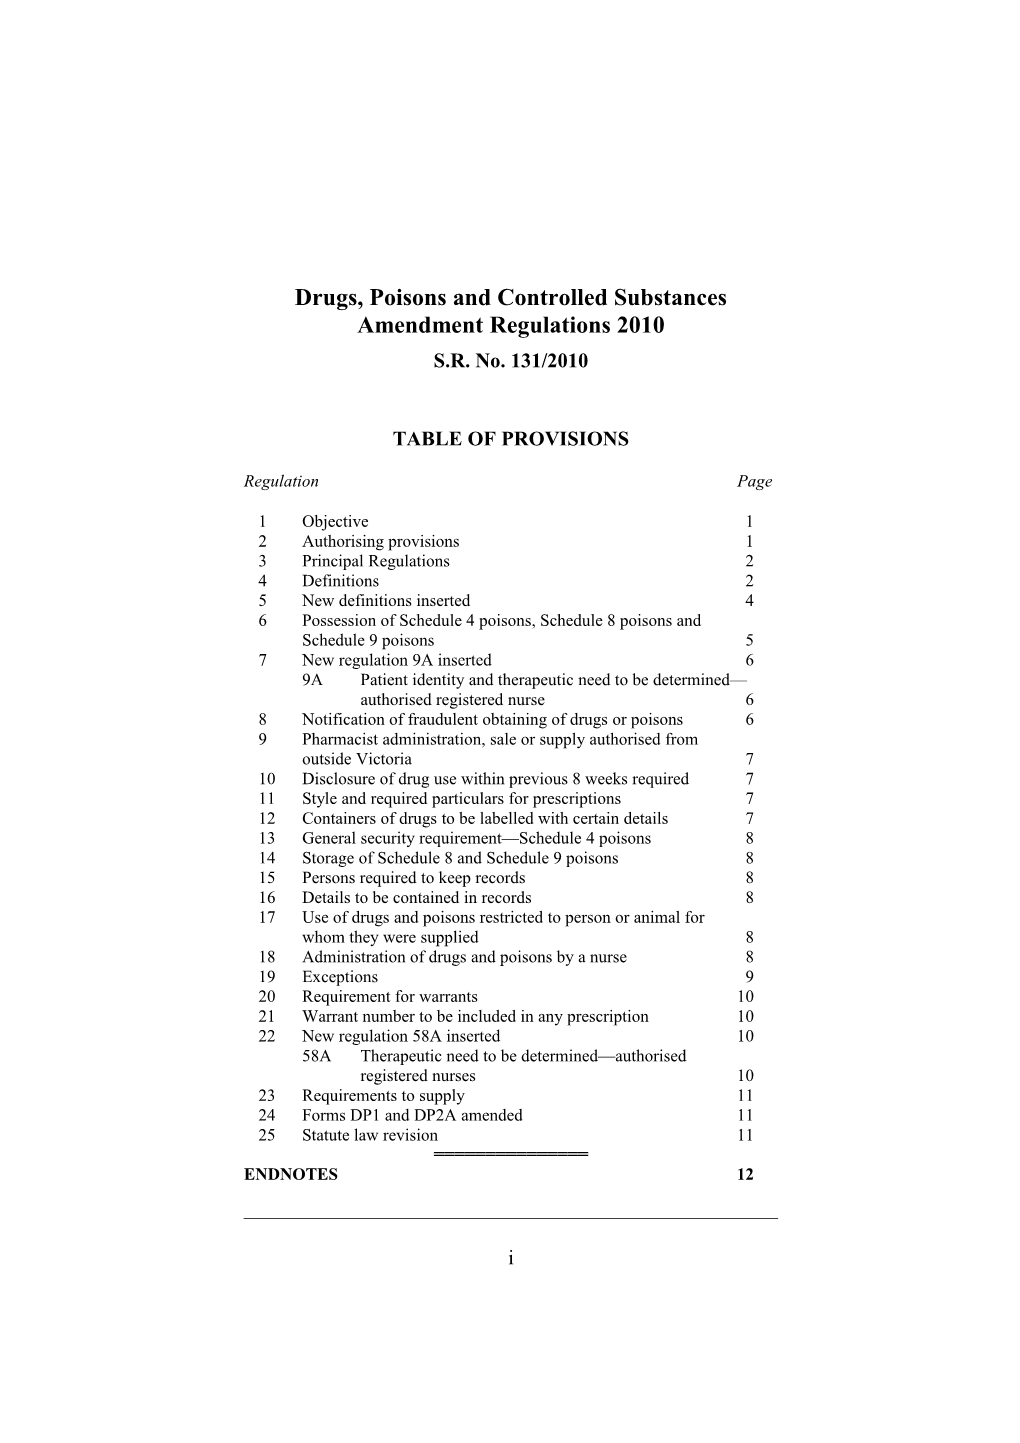 Drugs, Poisons and Controlled Substances Amendment Regulations 2010